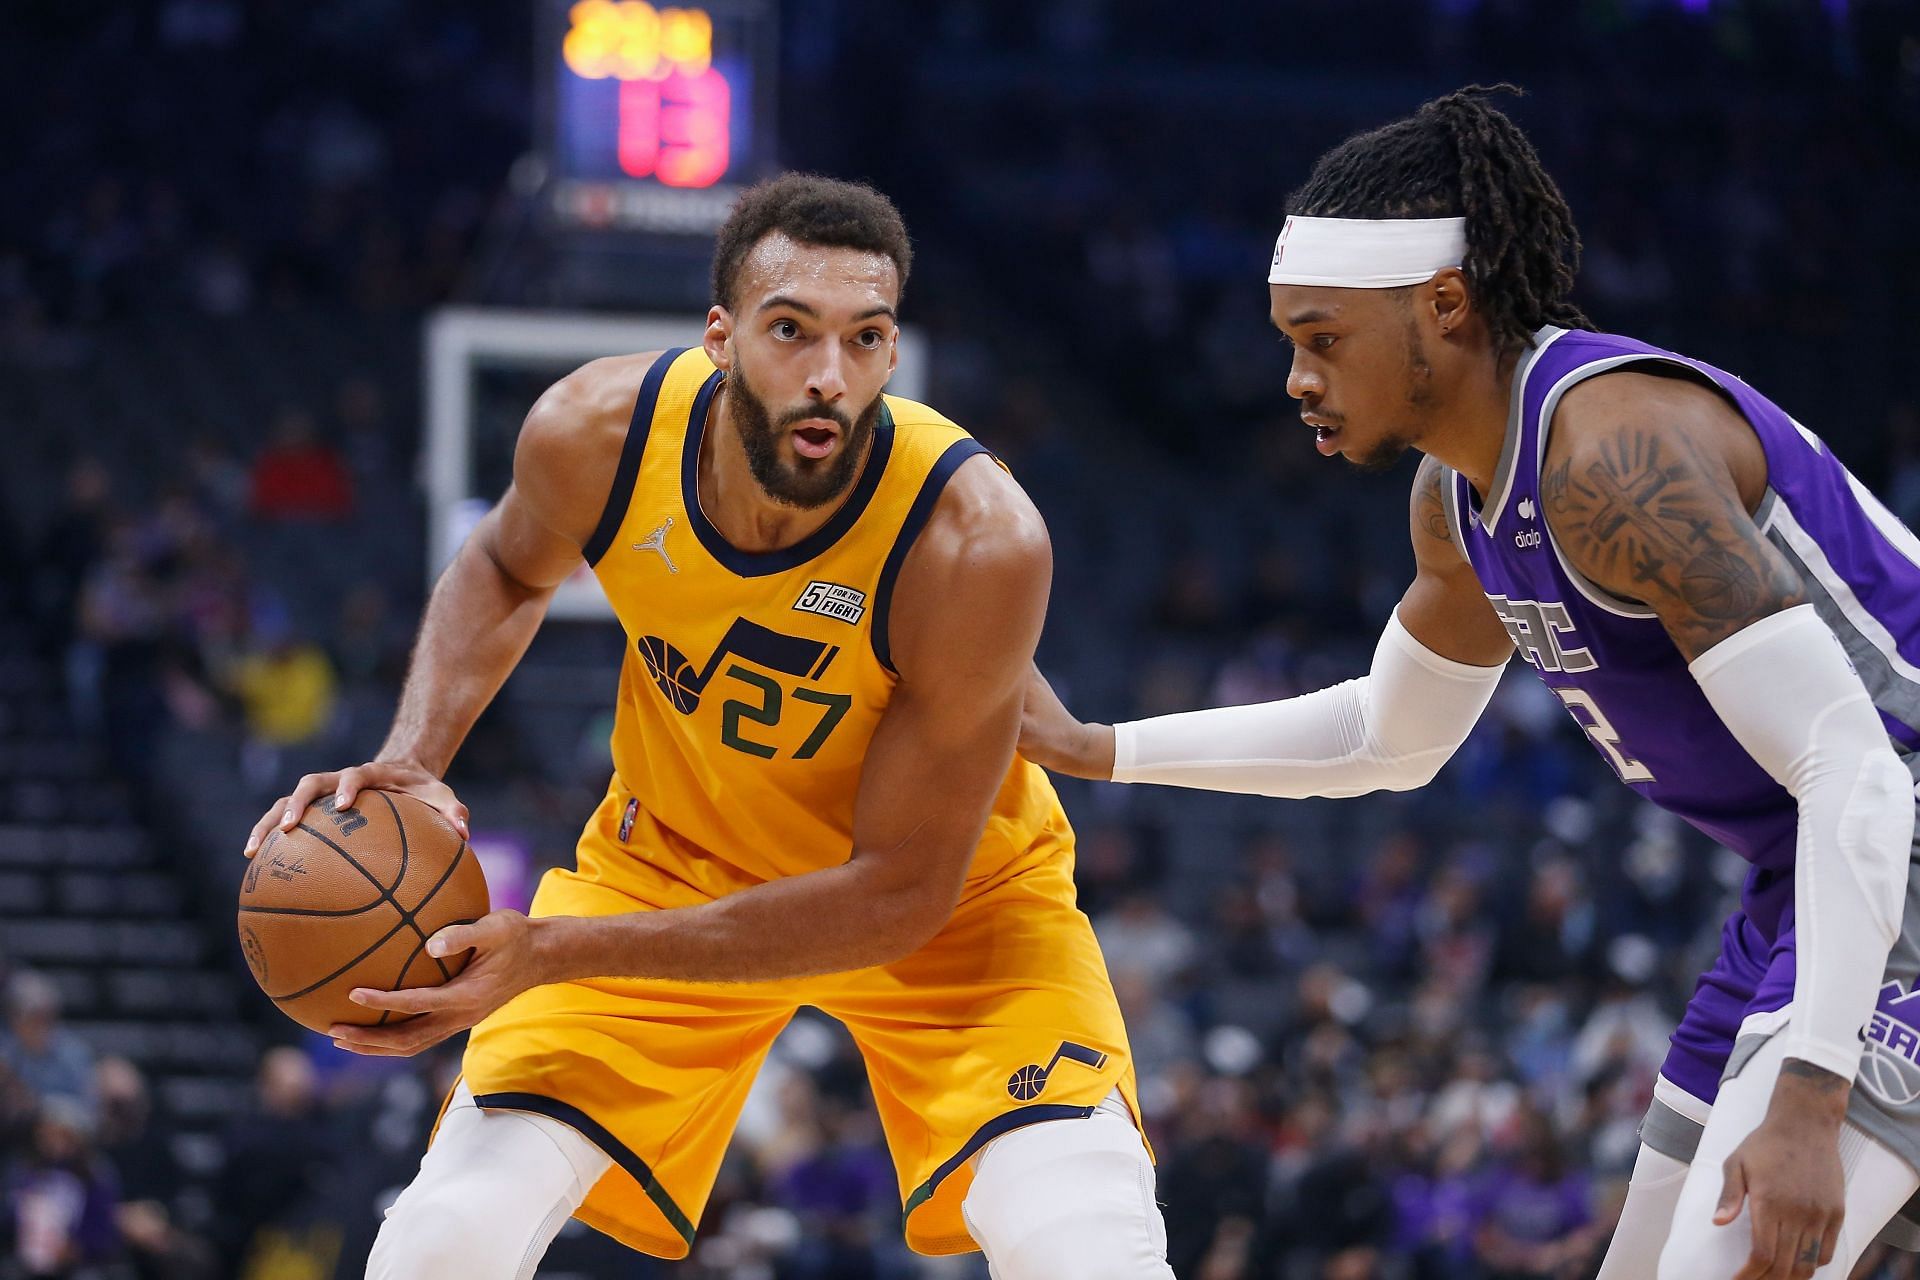 Utah Jazz big man Rudy Gobert is heating up in the Defensive Player of the year race